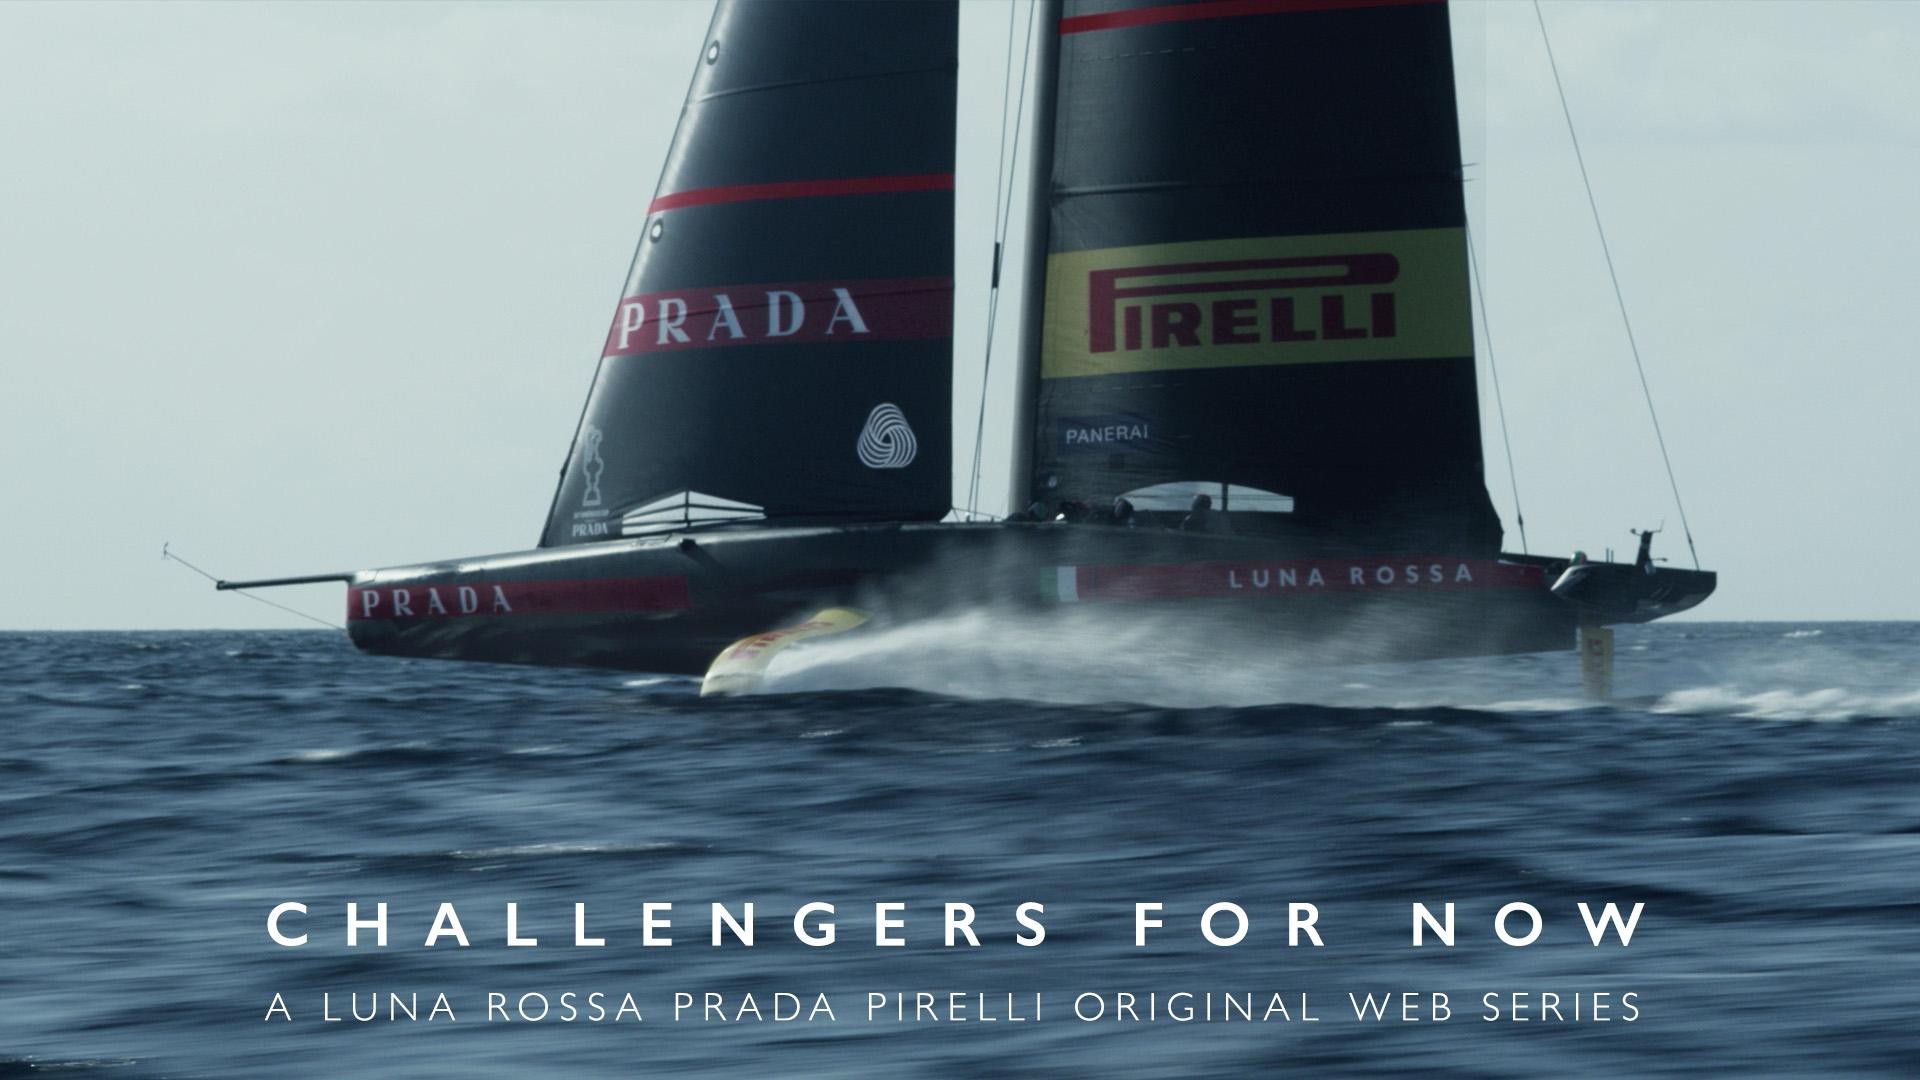 “Challengers for Now”, the web series dedicated to the Luna Rossa Prada Pirelli Team challenge, is now online